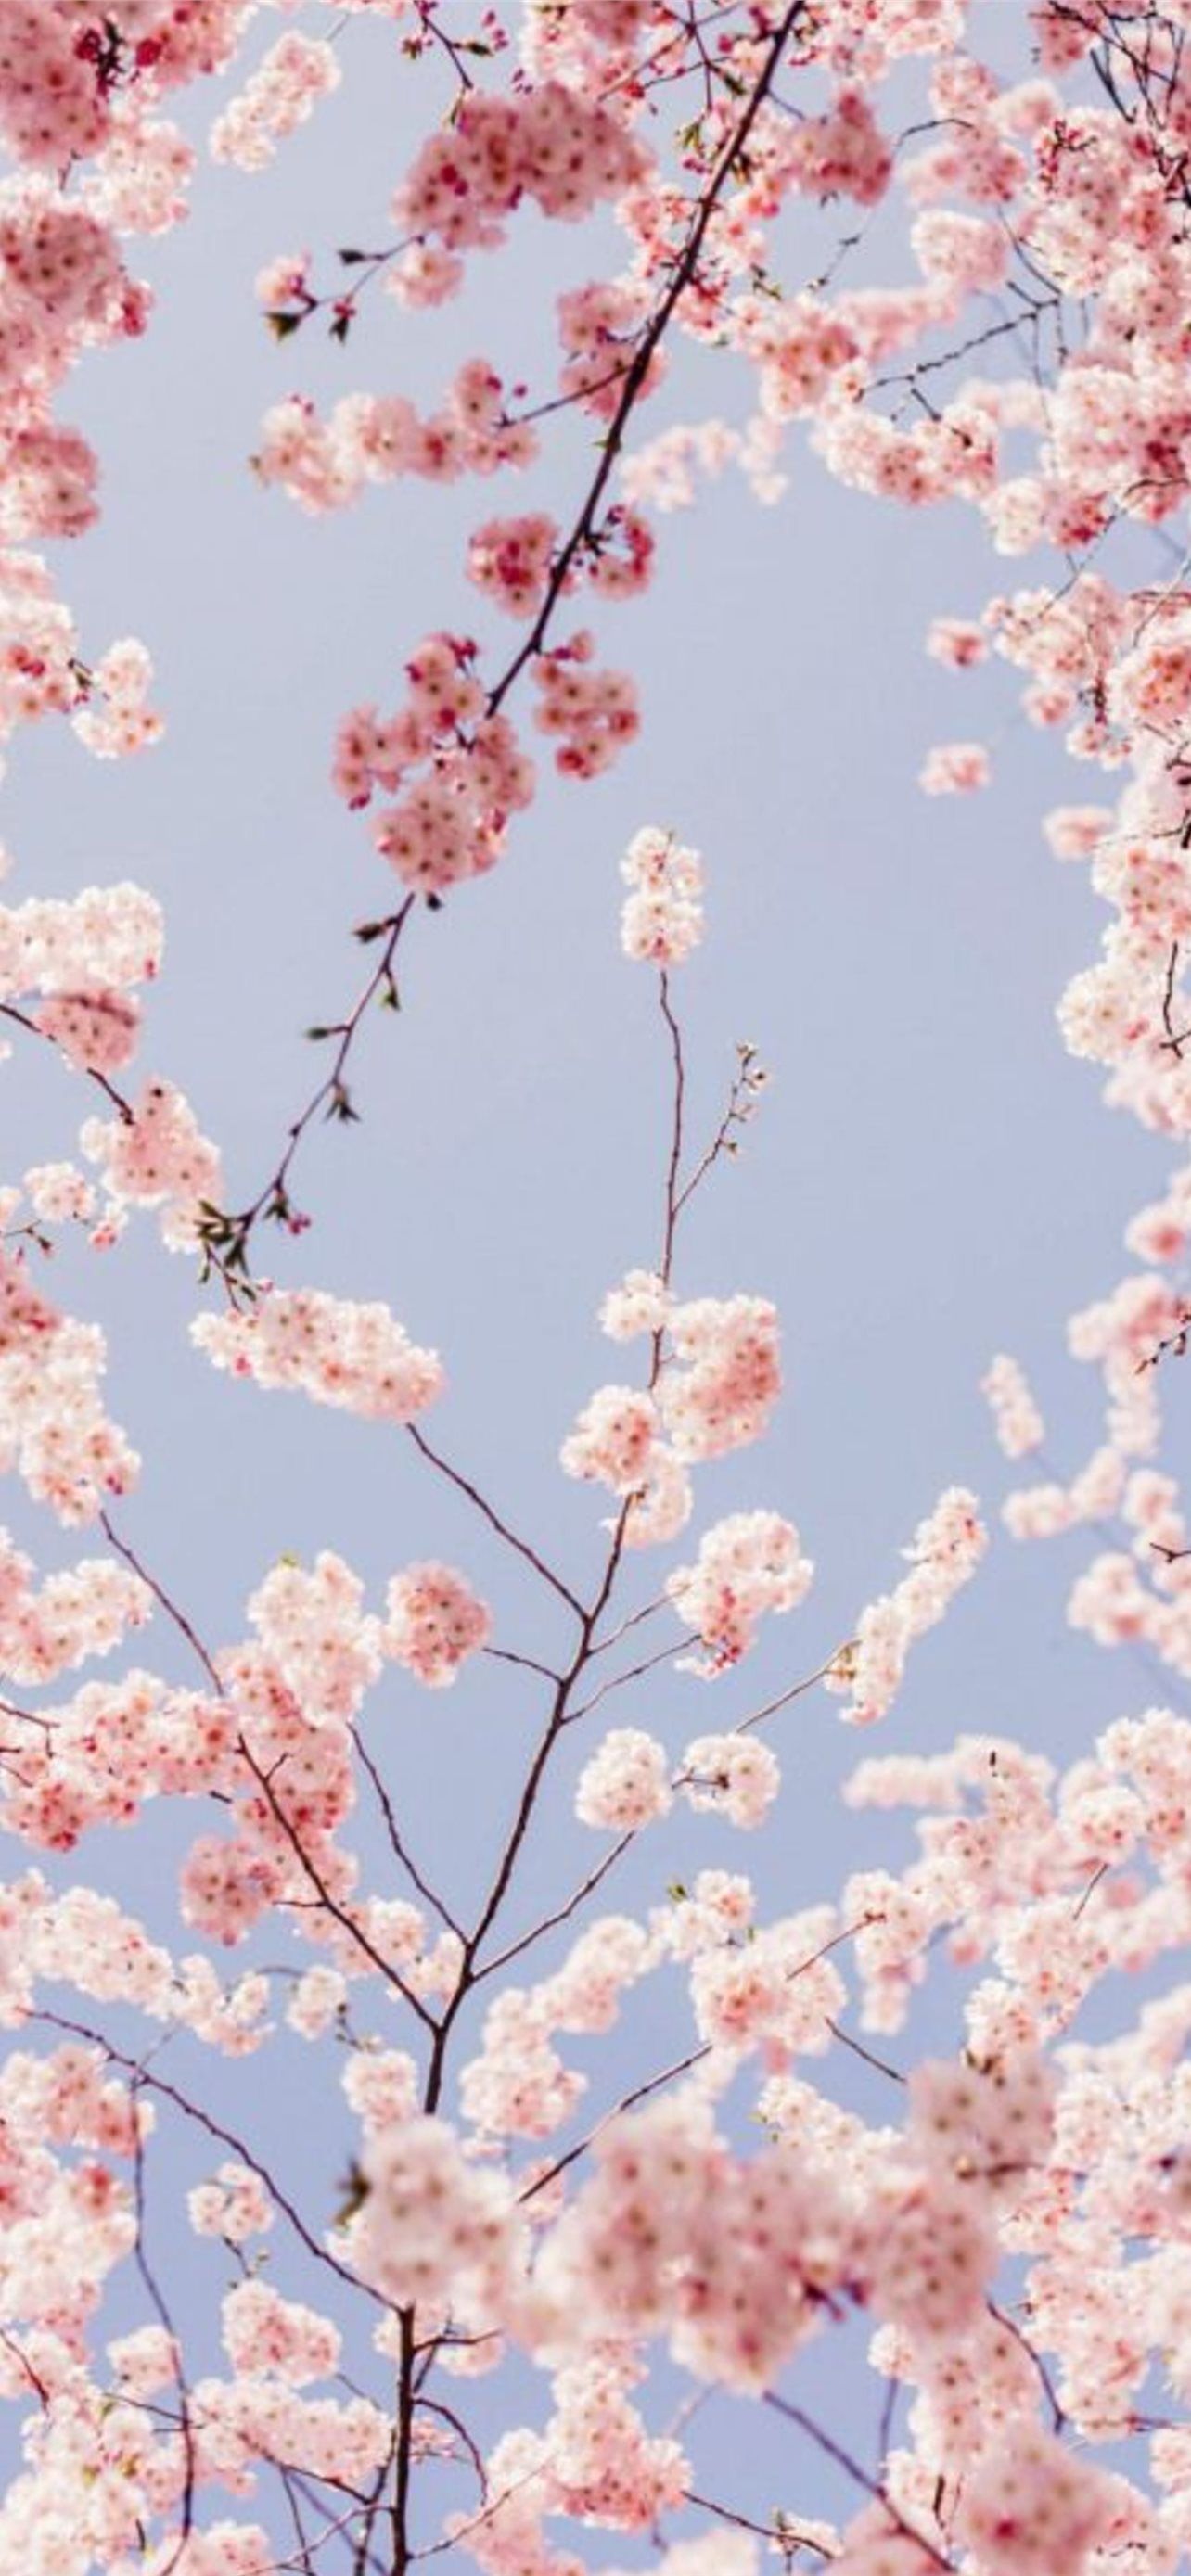 cherry blossoms iPhone Wallpaper Free Download